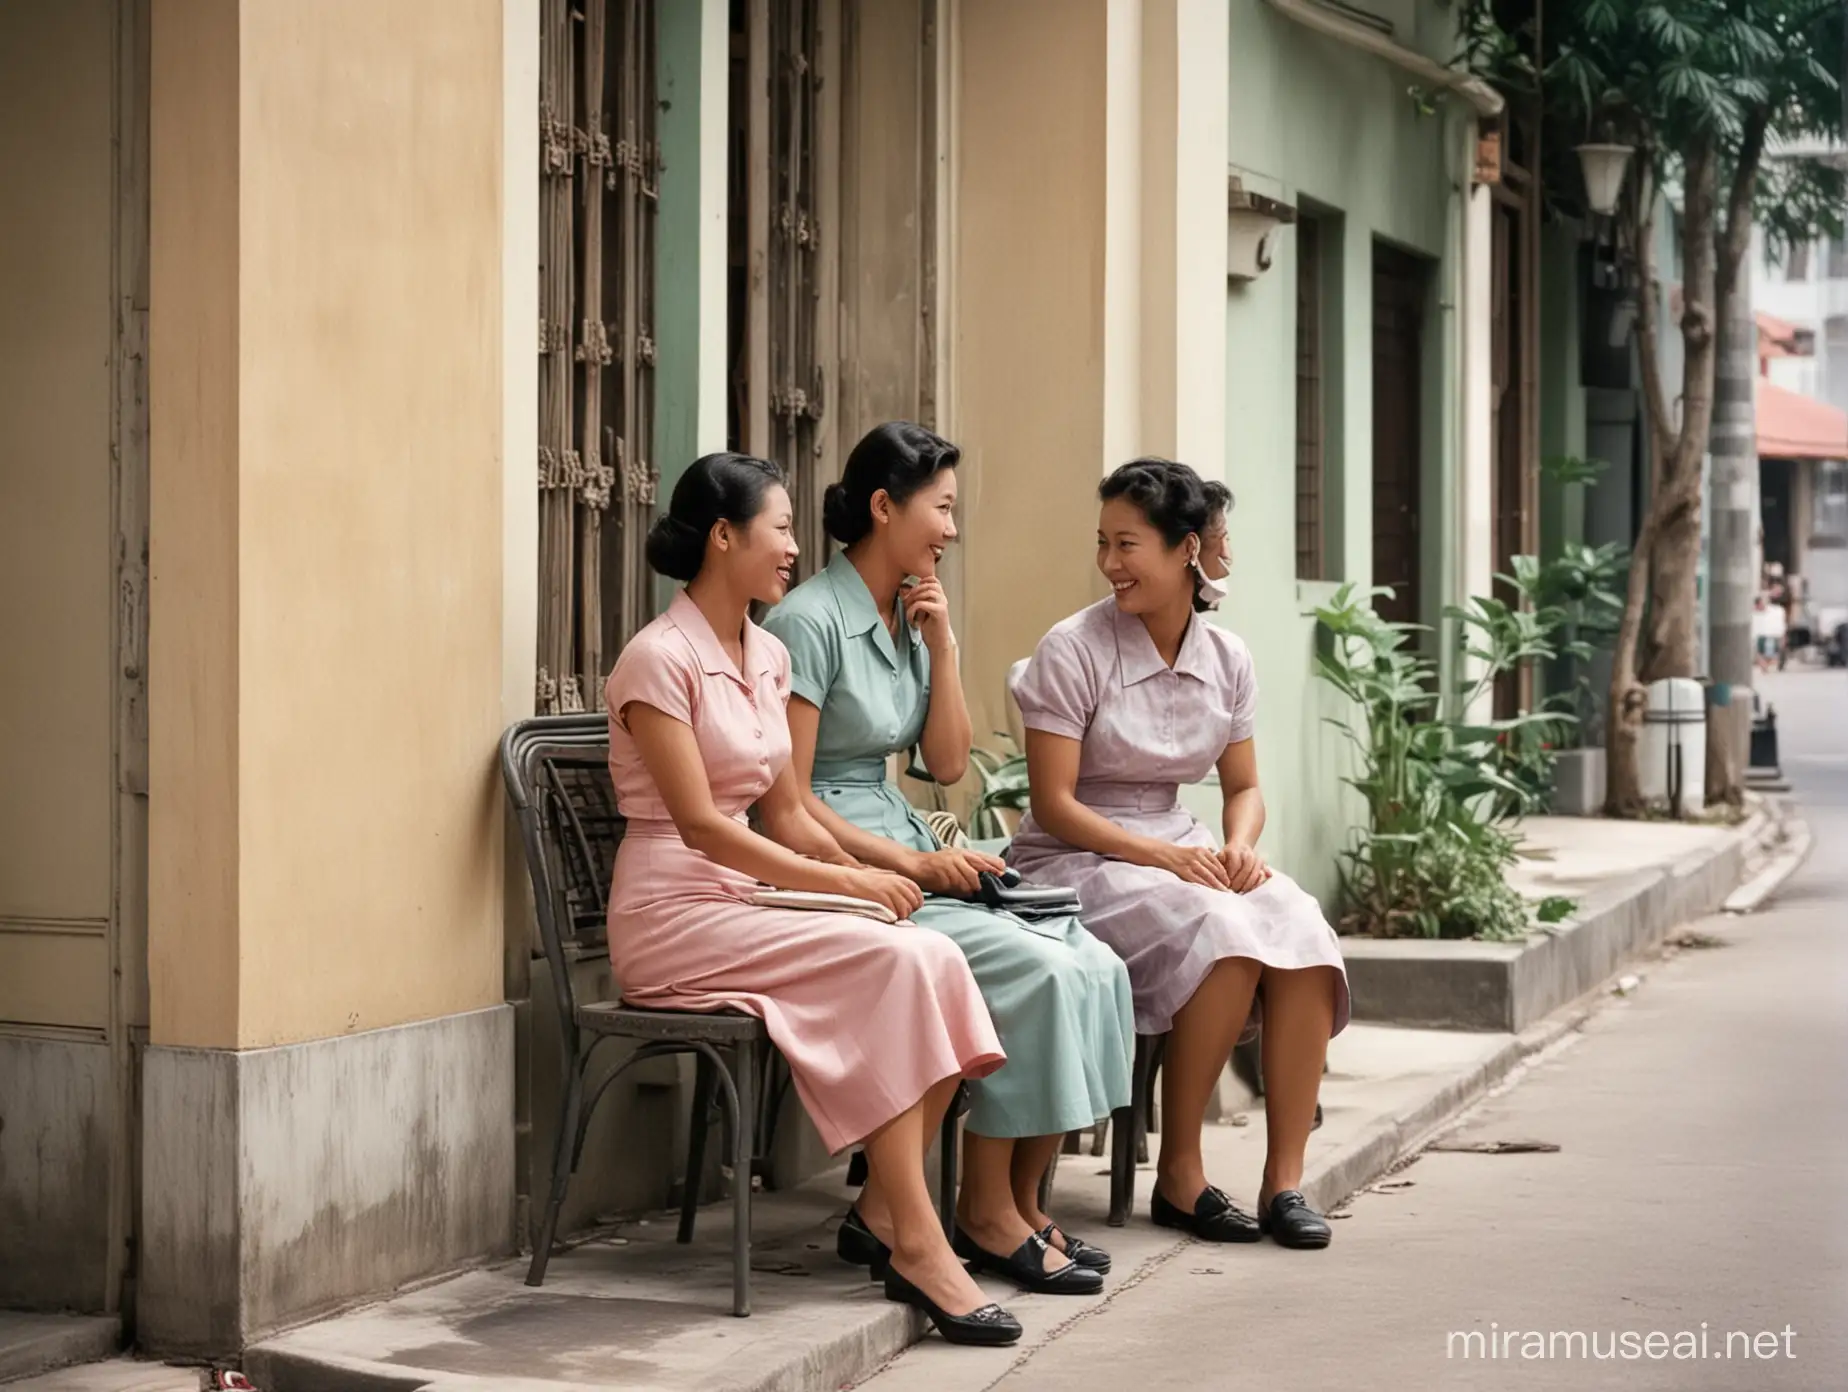 1950 Singapore in color. Two amahs, Chinese domestic workers chatting while seated by the street. 